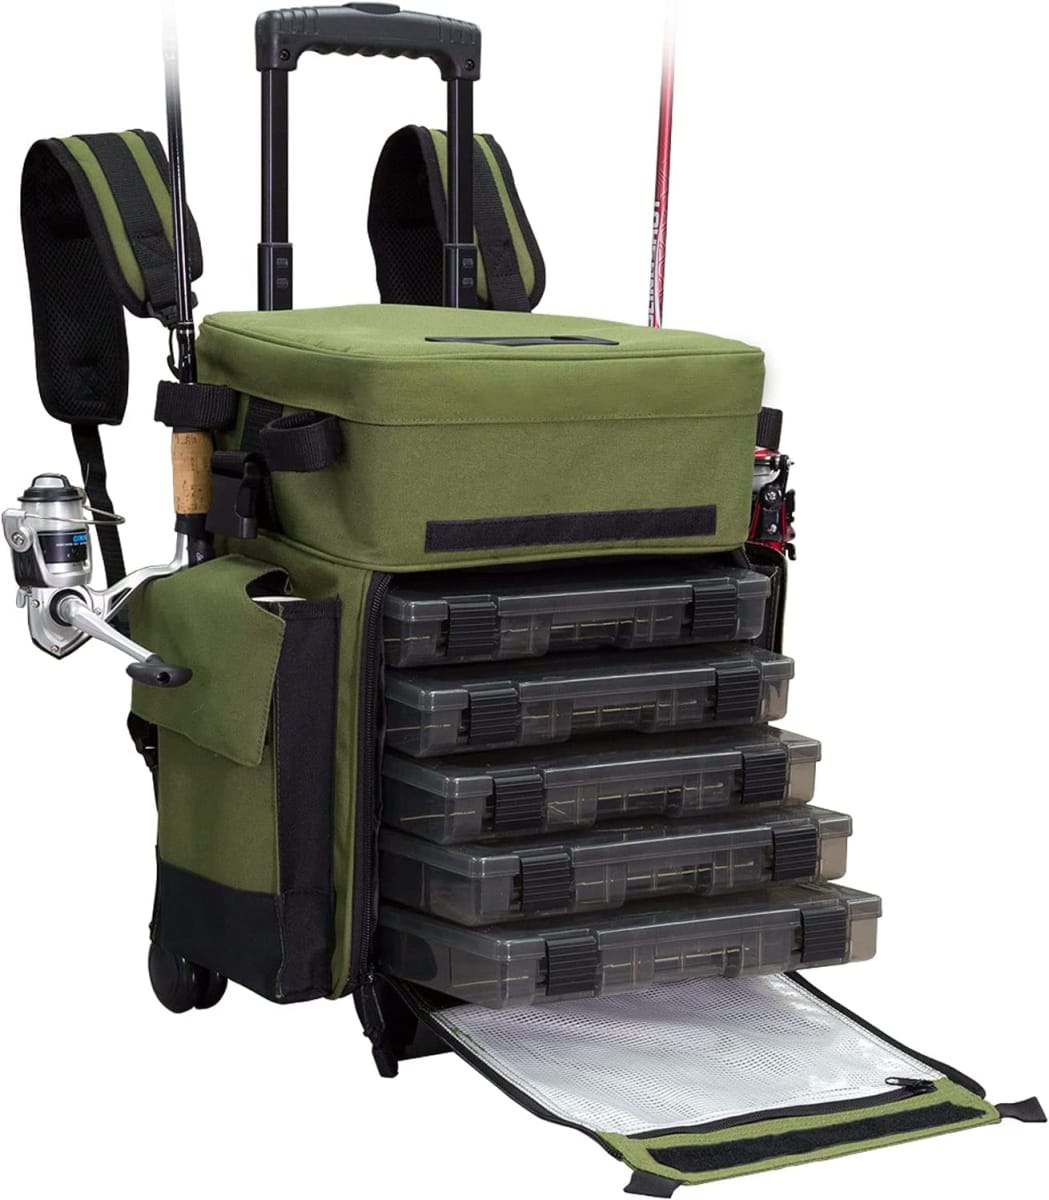 Rolling Tackle Box with Wheels - Waterproof Rolling Fishing Backpack, 5 Removable Tackle Trays, 4 Rod Holders, Fishing Gifts for Men, Fish Tackle Bag, Roller Tackle Box